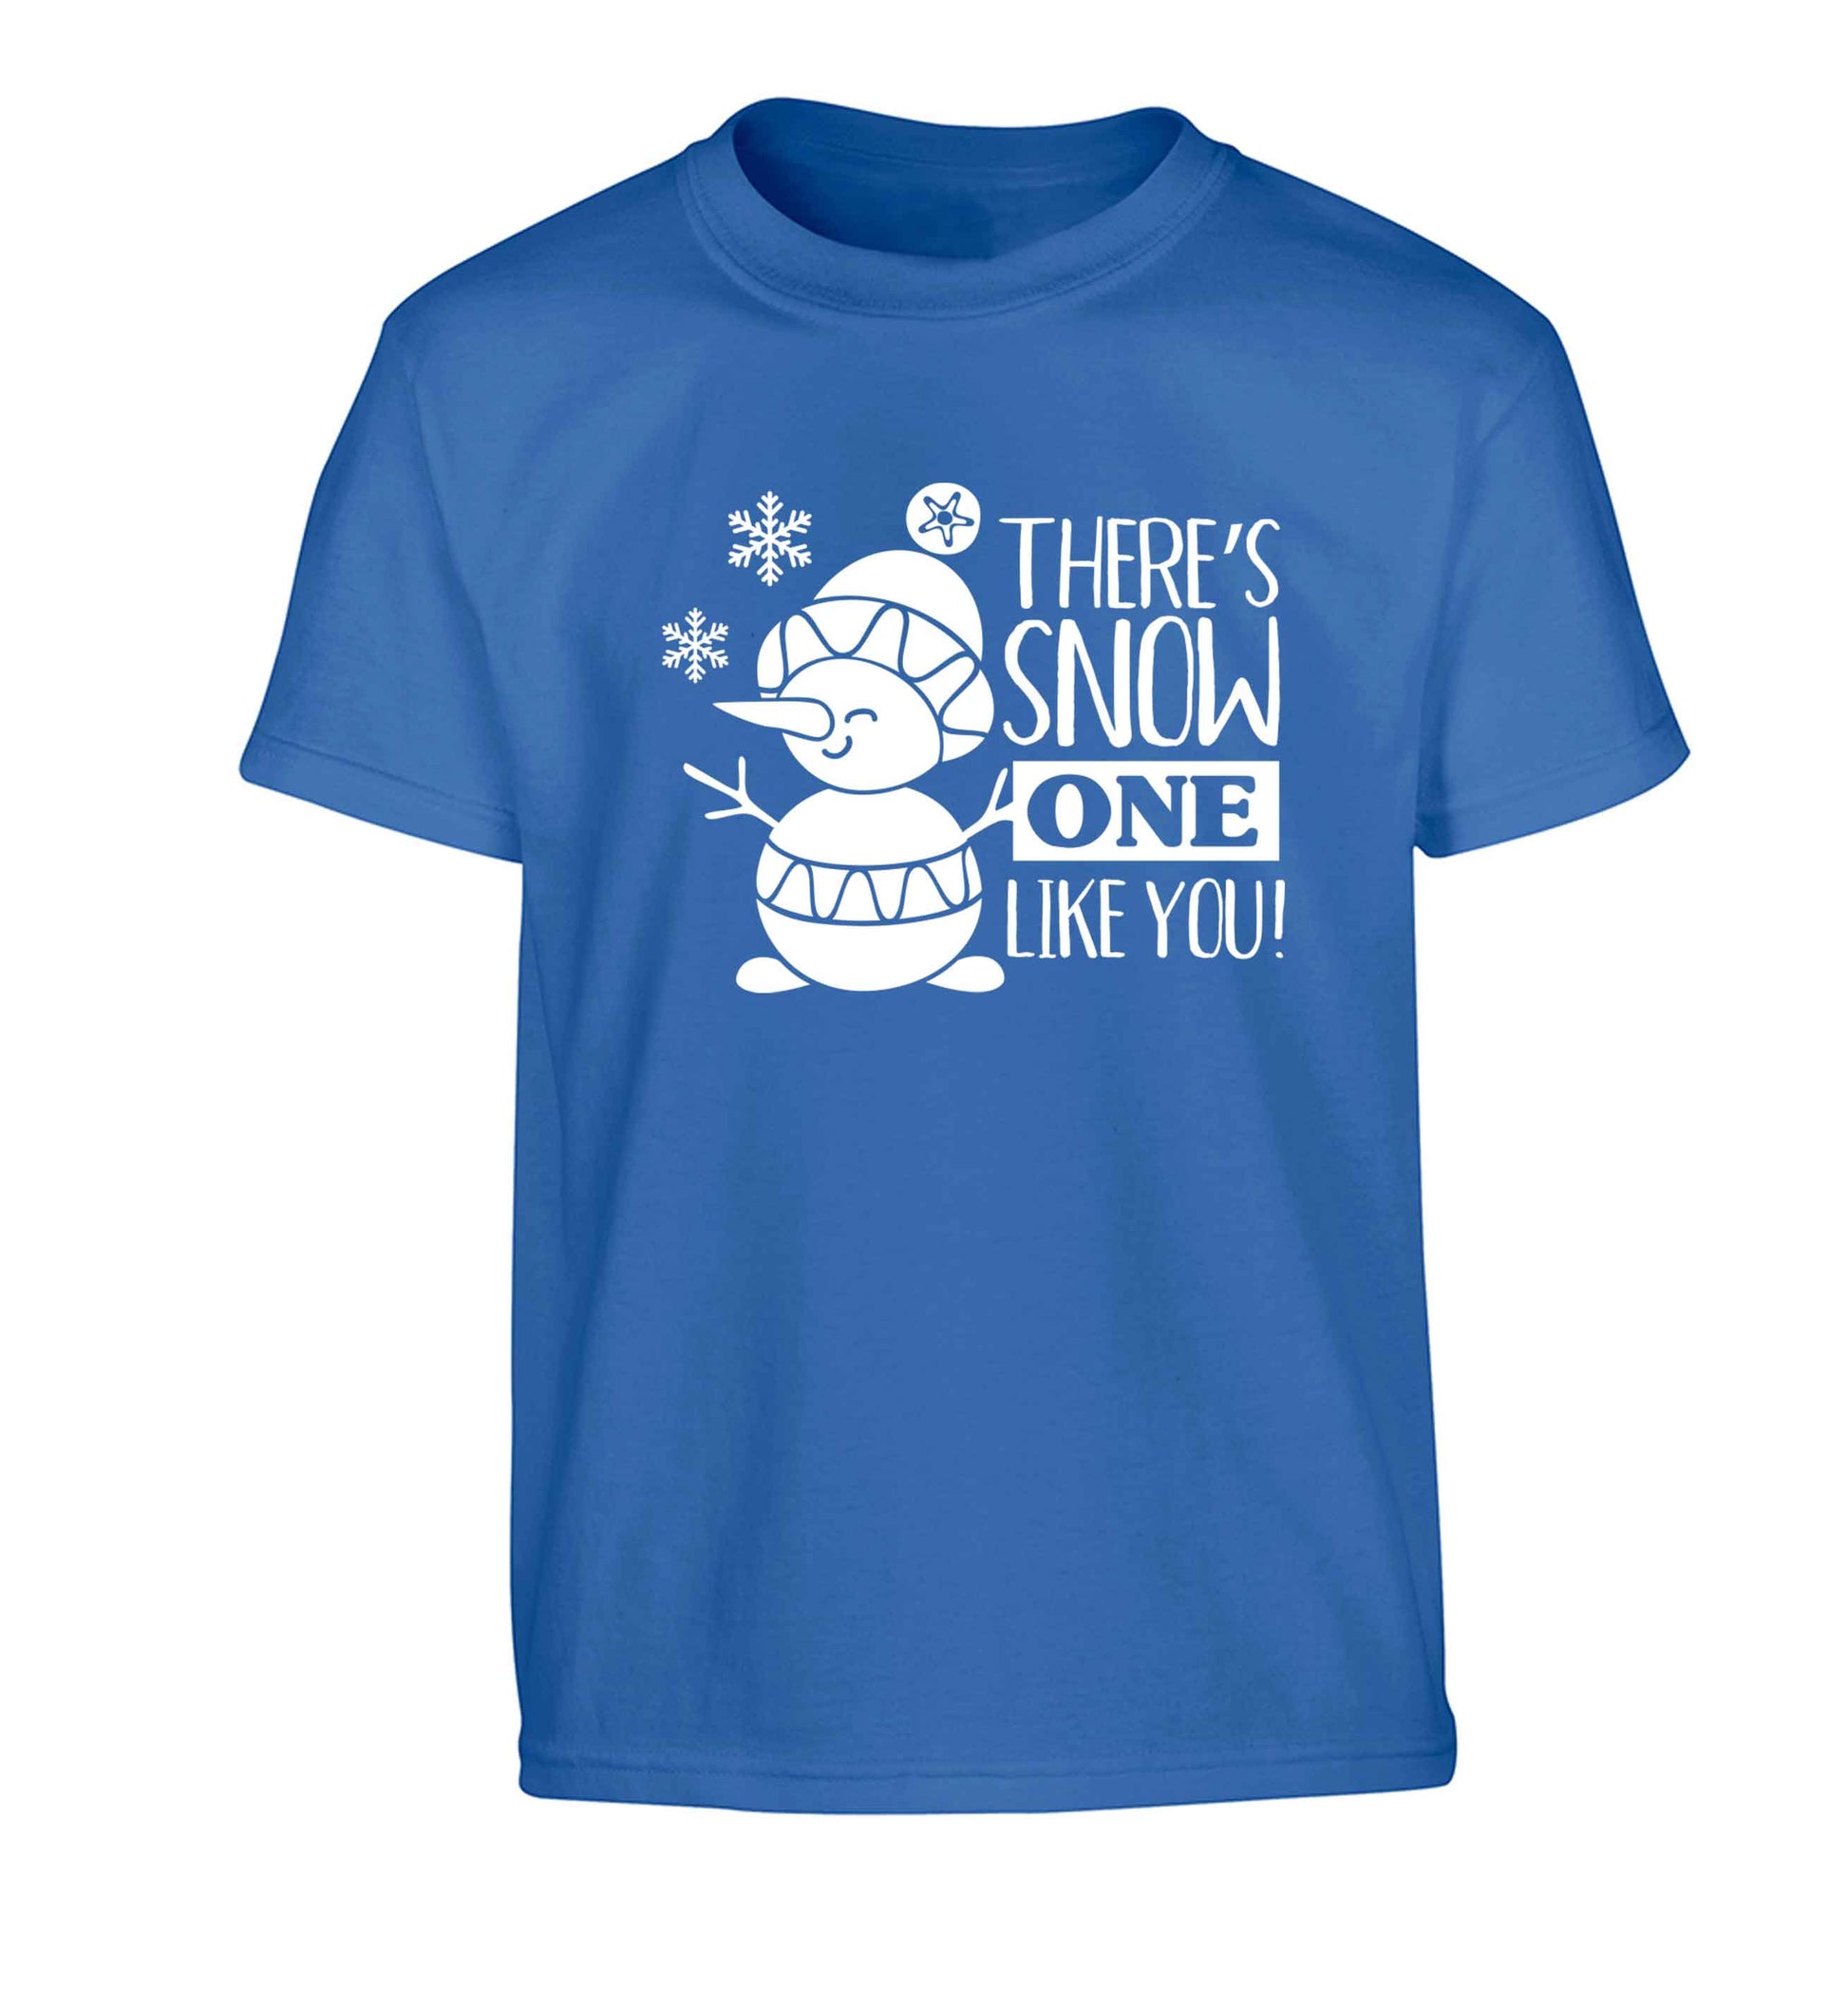 There's snow one like you Children's blue Tshirt 12-13 Years